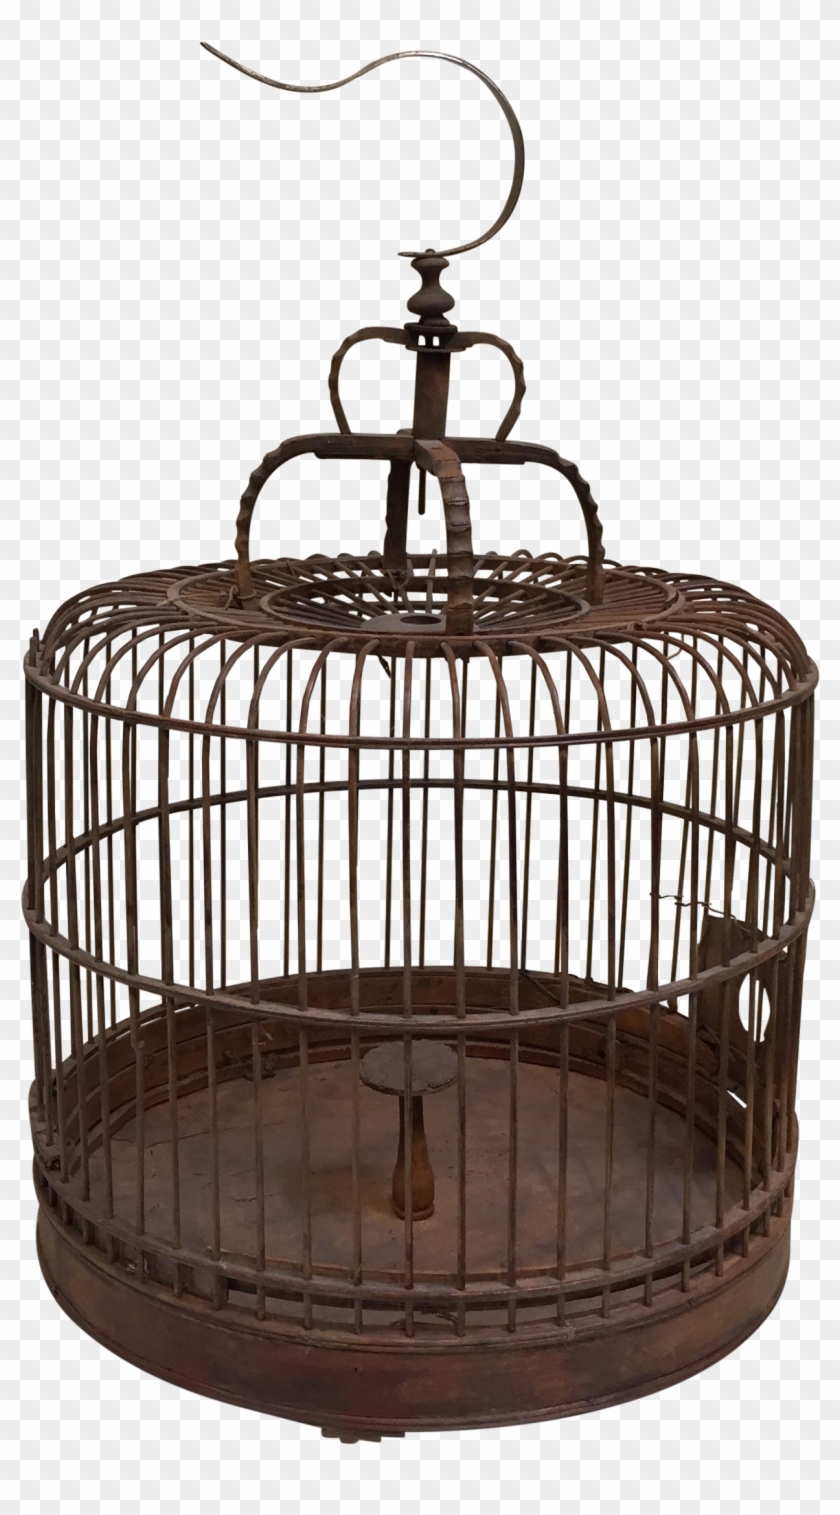 1371 X 2409 3 - Cage Clipart #1904785